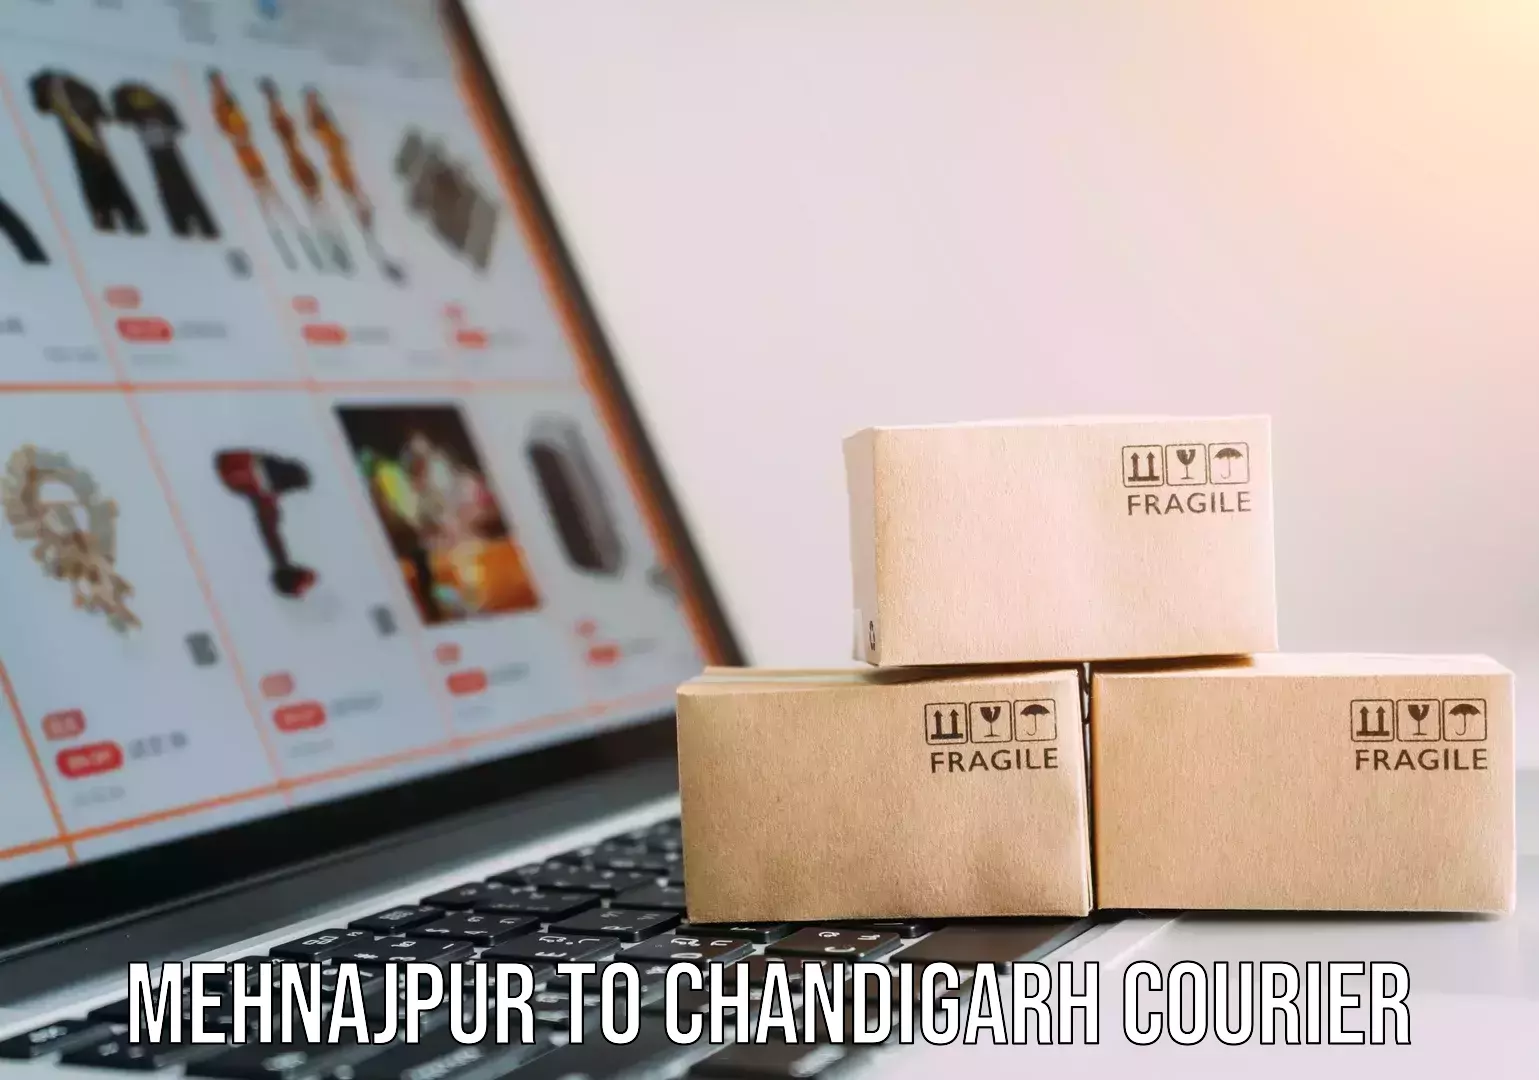 Professional movers and packers Mehnajpur to Chandigarh